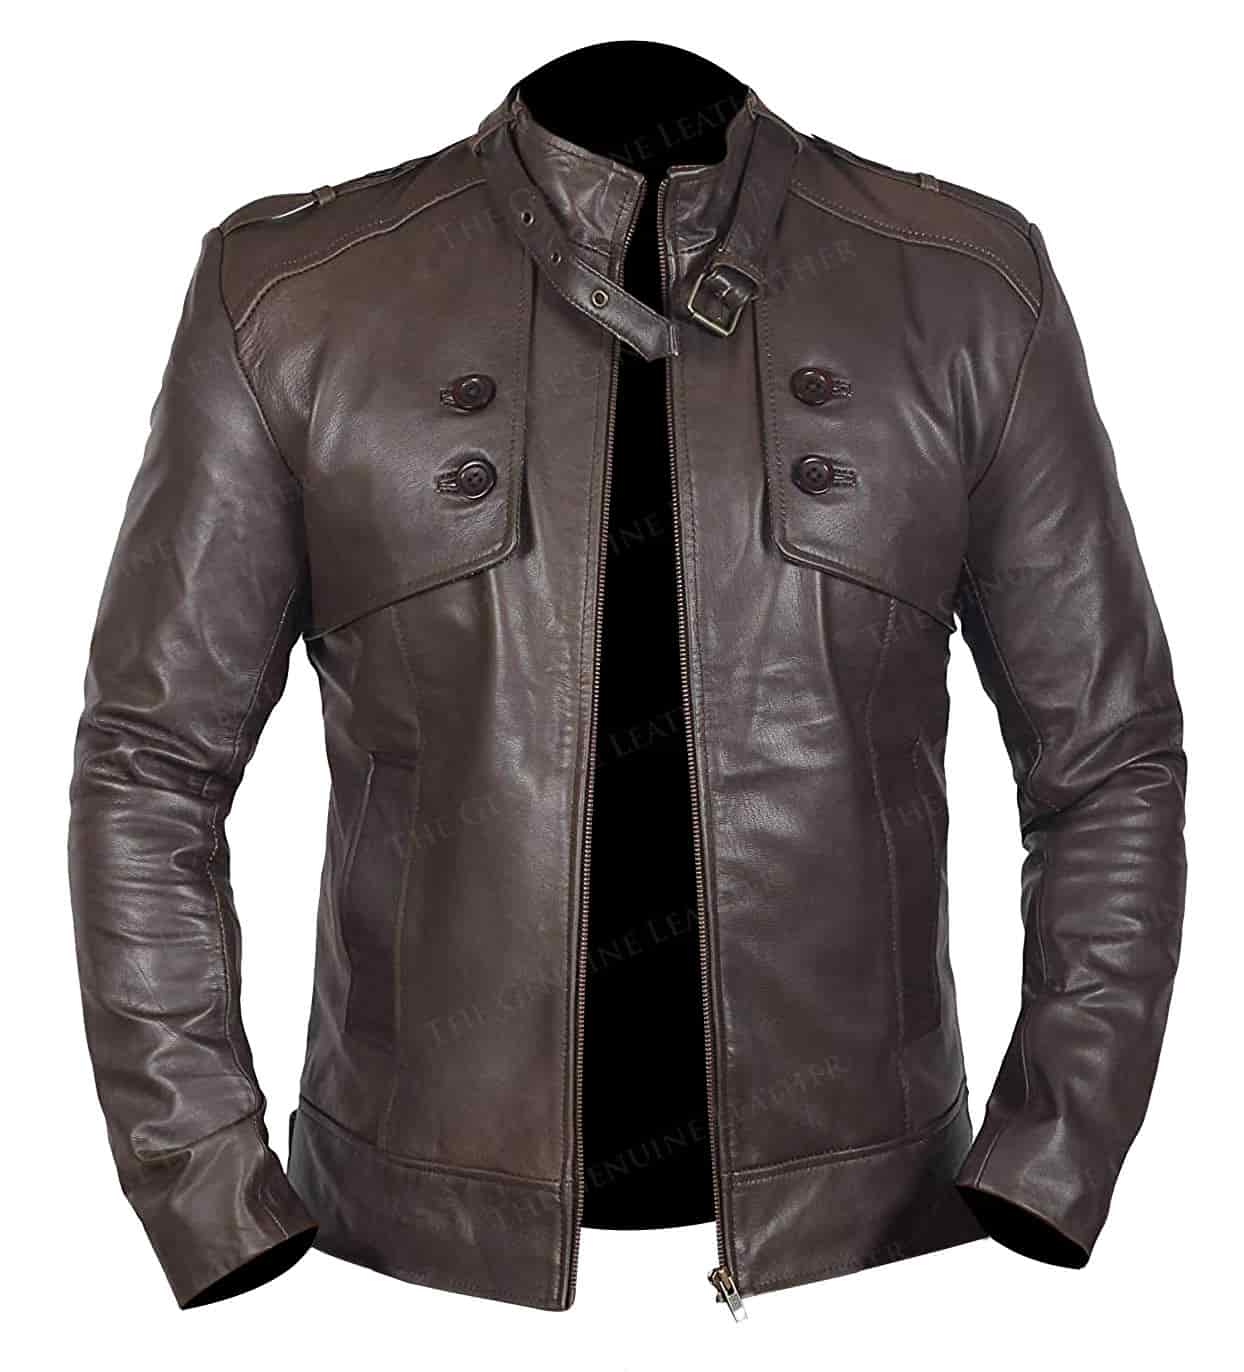 Chocolate brown leather jacket